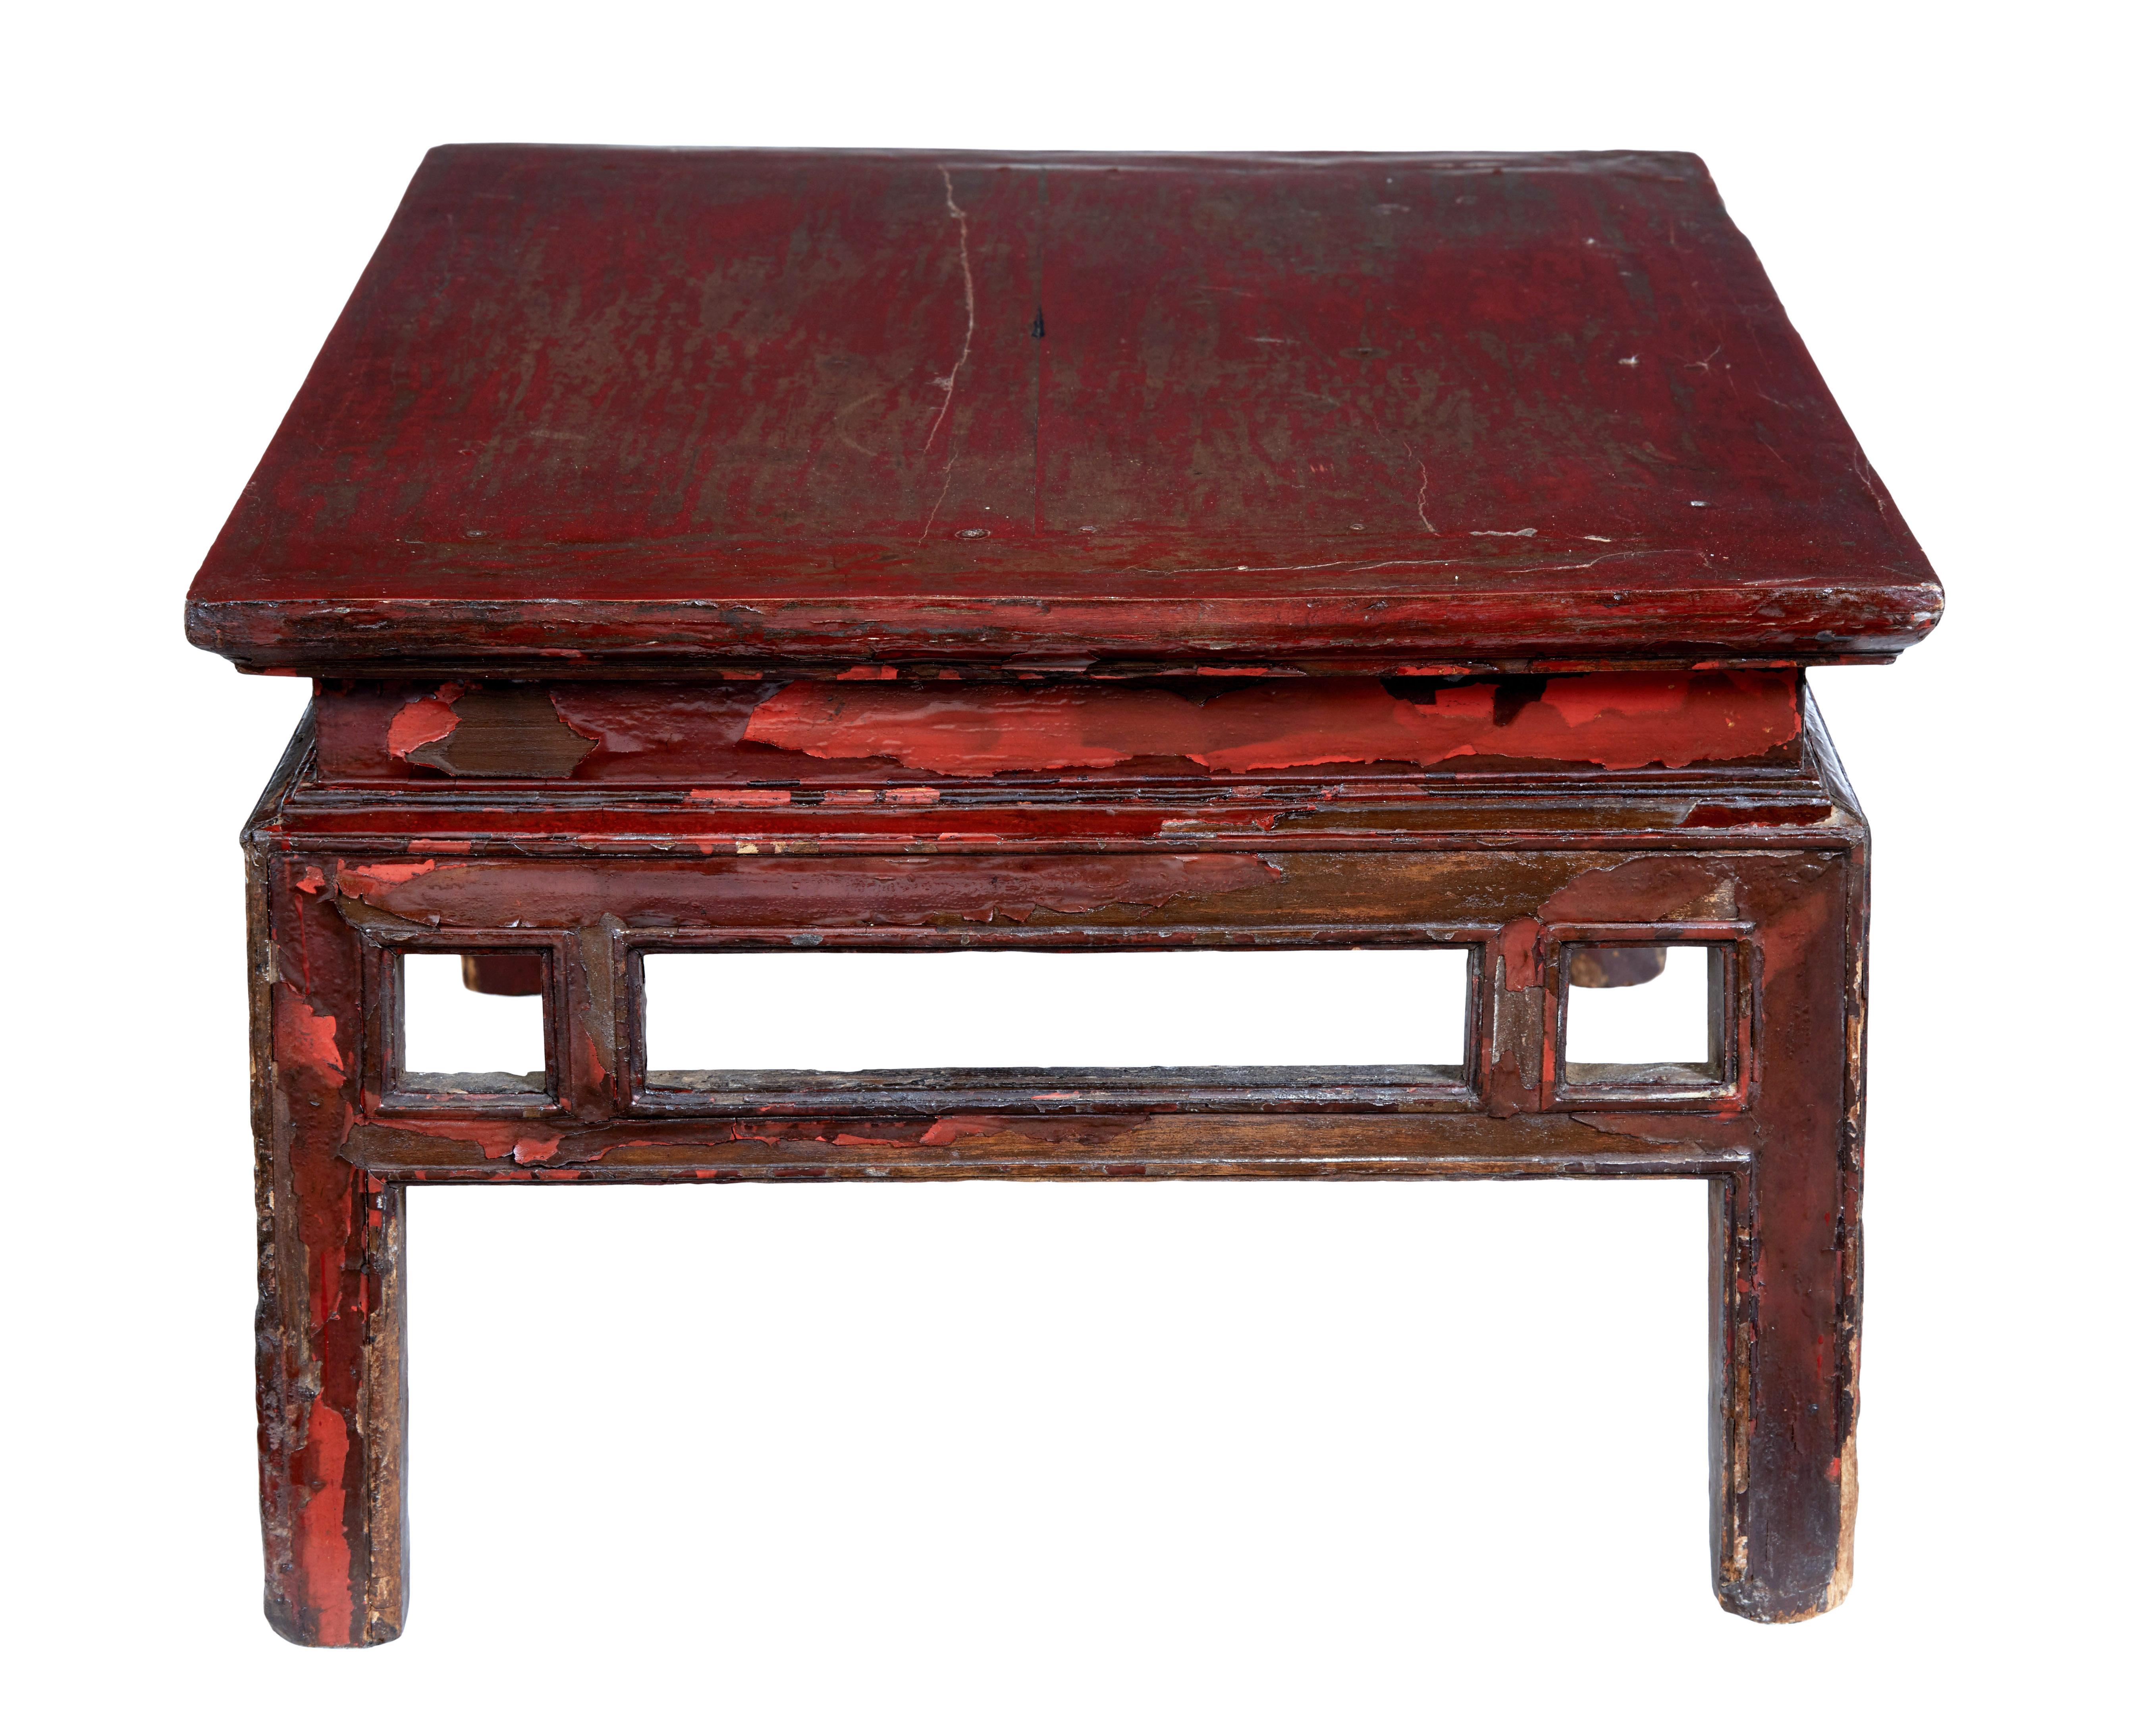 18th century Chinese painted low occasional table, circa 1780.

Here we have a low practical occasional table, richly coloured table, with distressed paint showing at least 2 shades, some areas showing complete paint loss. Original condition.